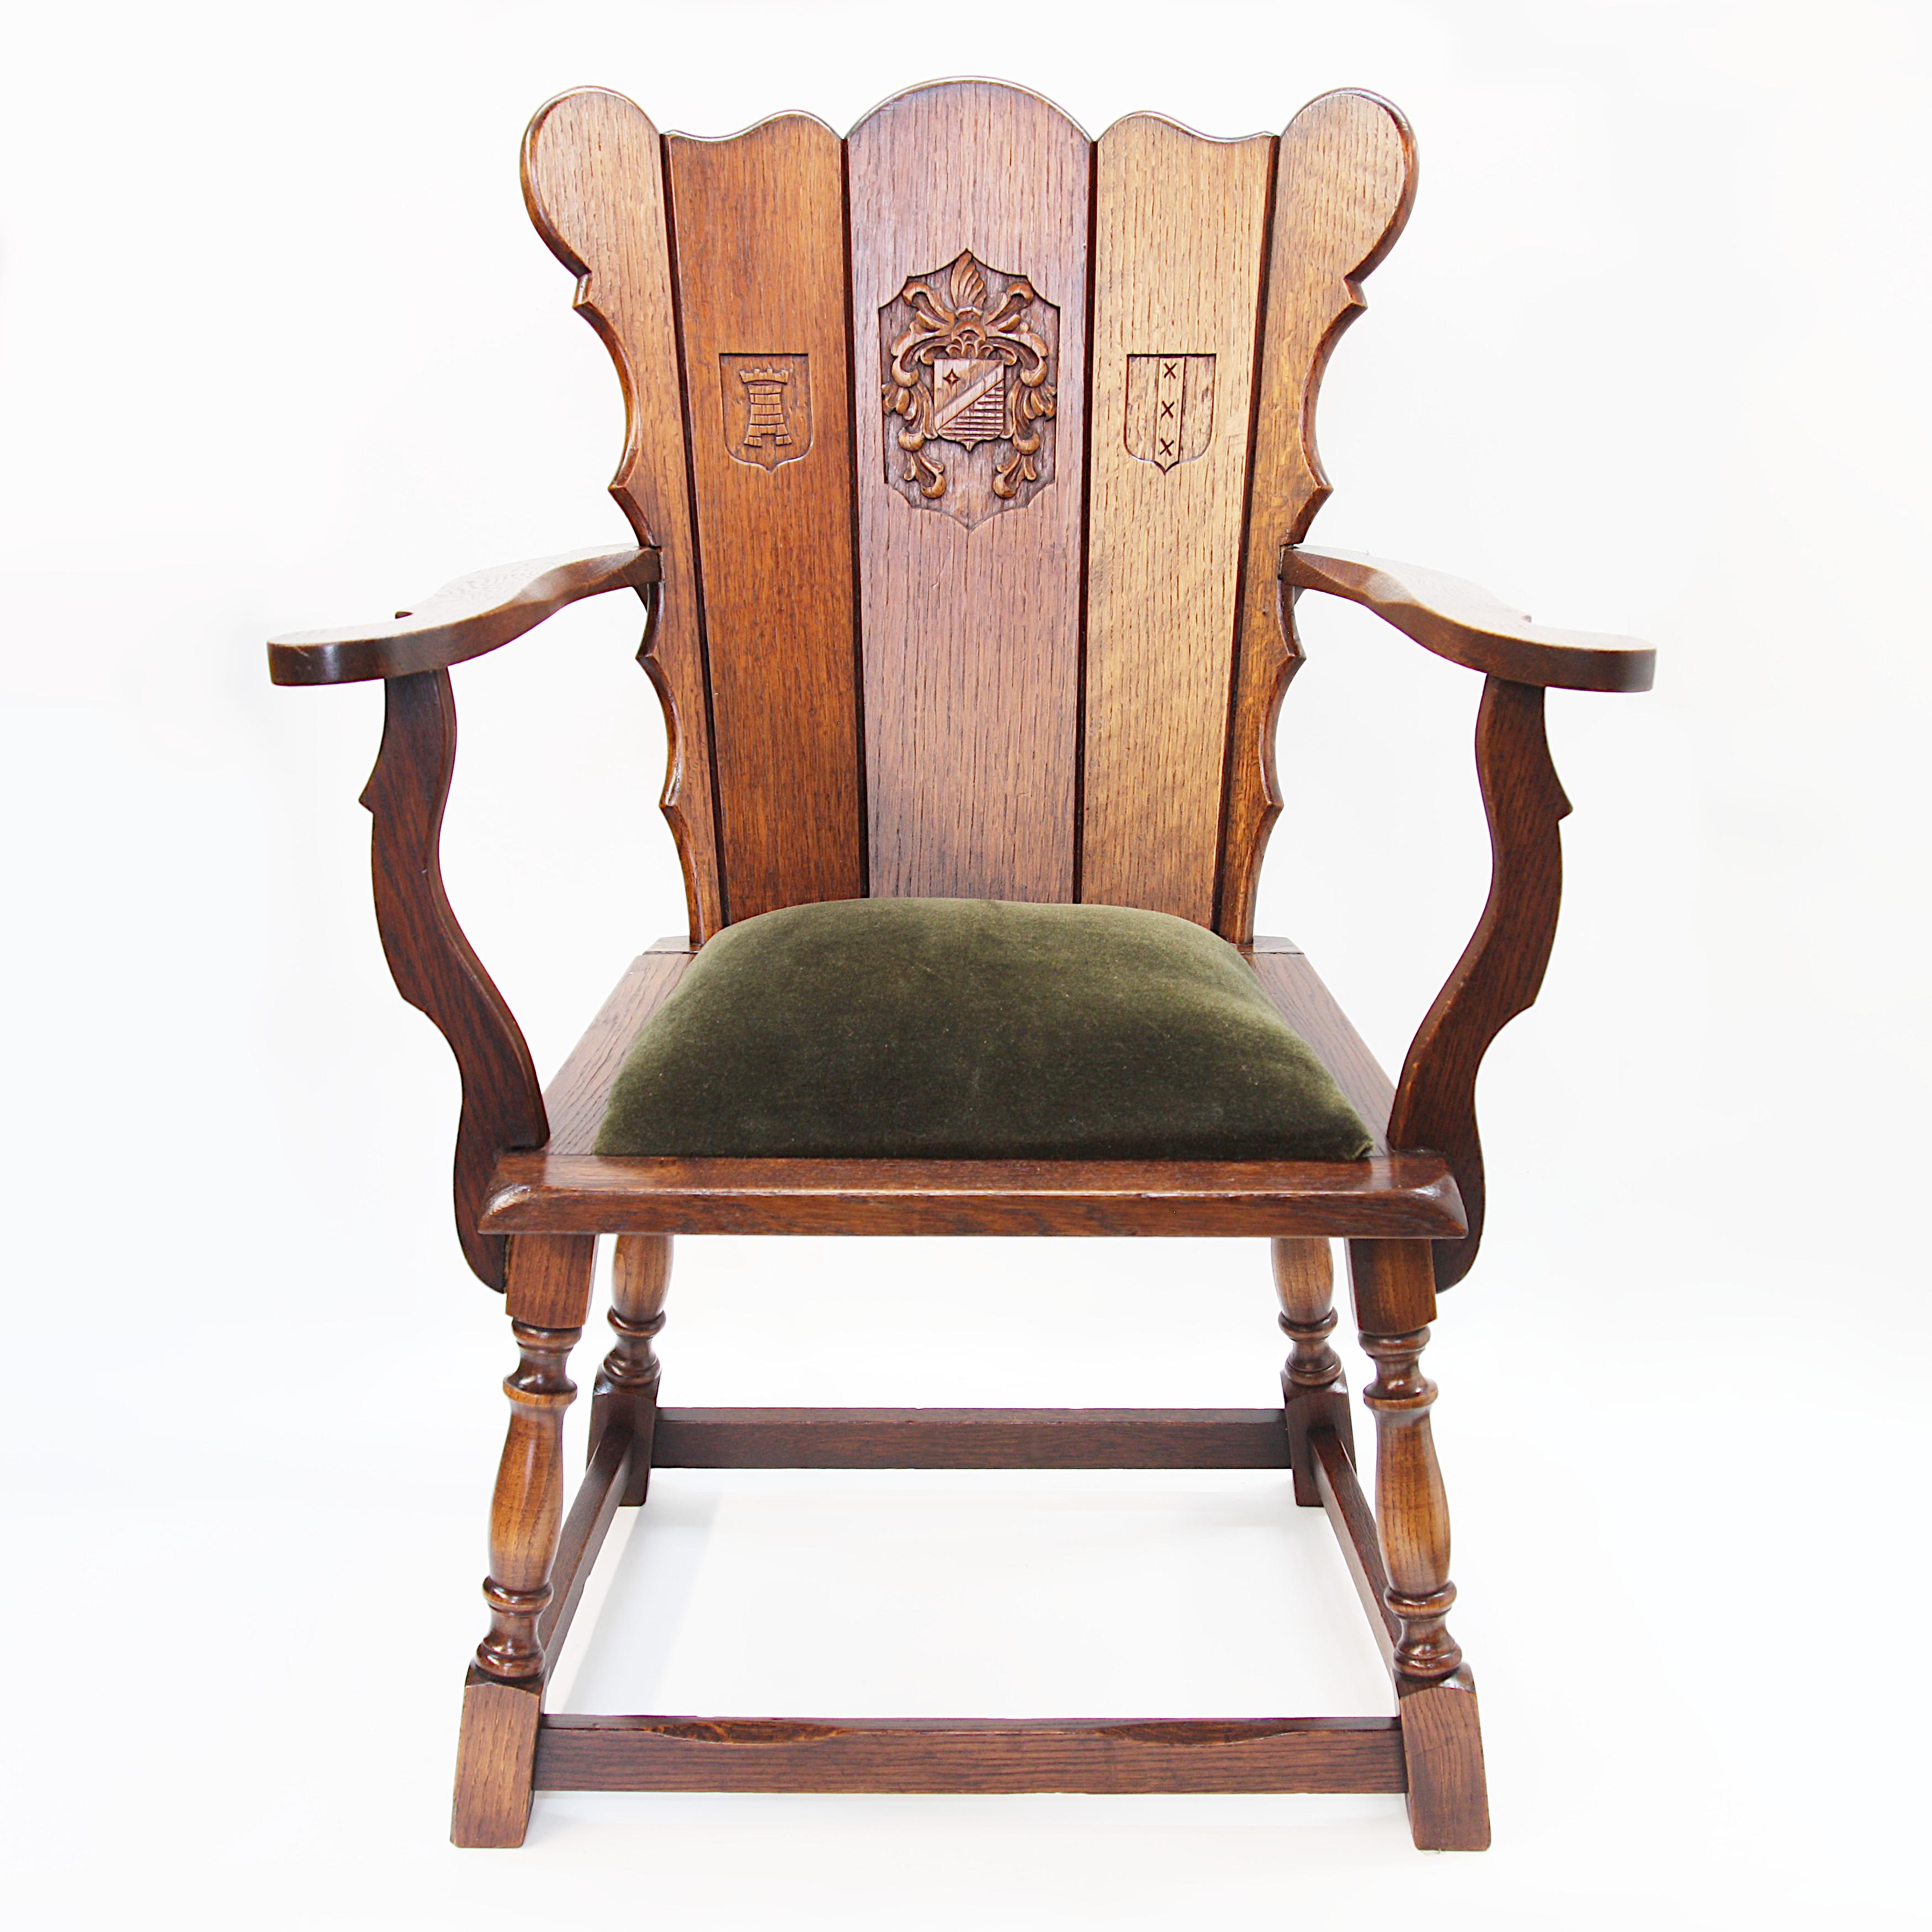 medieval chairs for sale